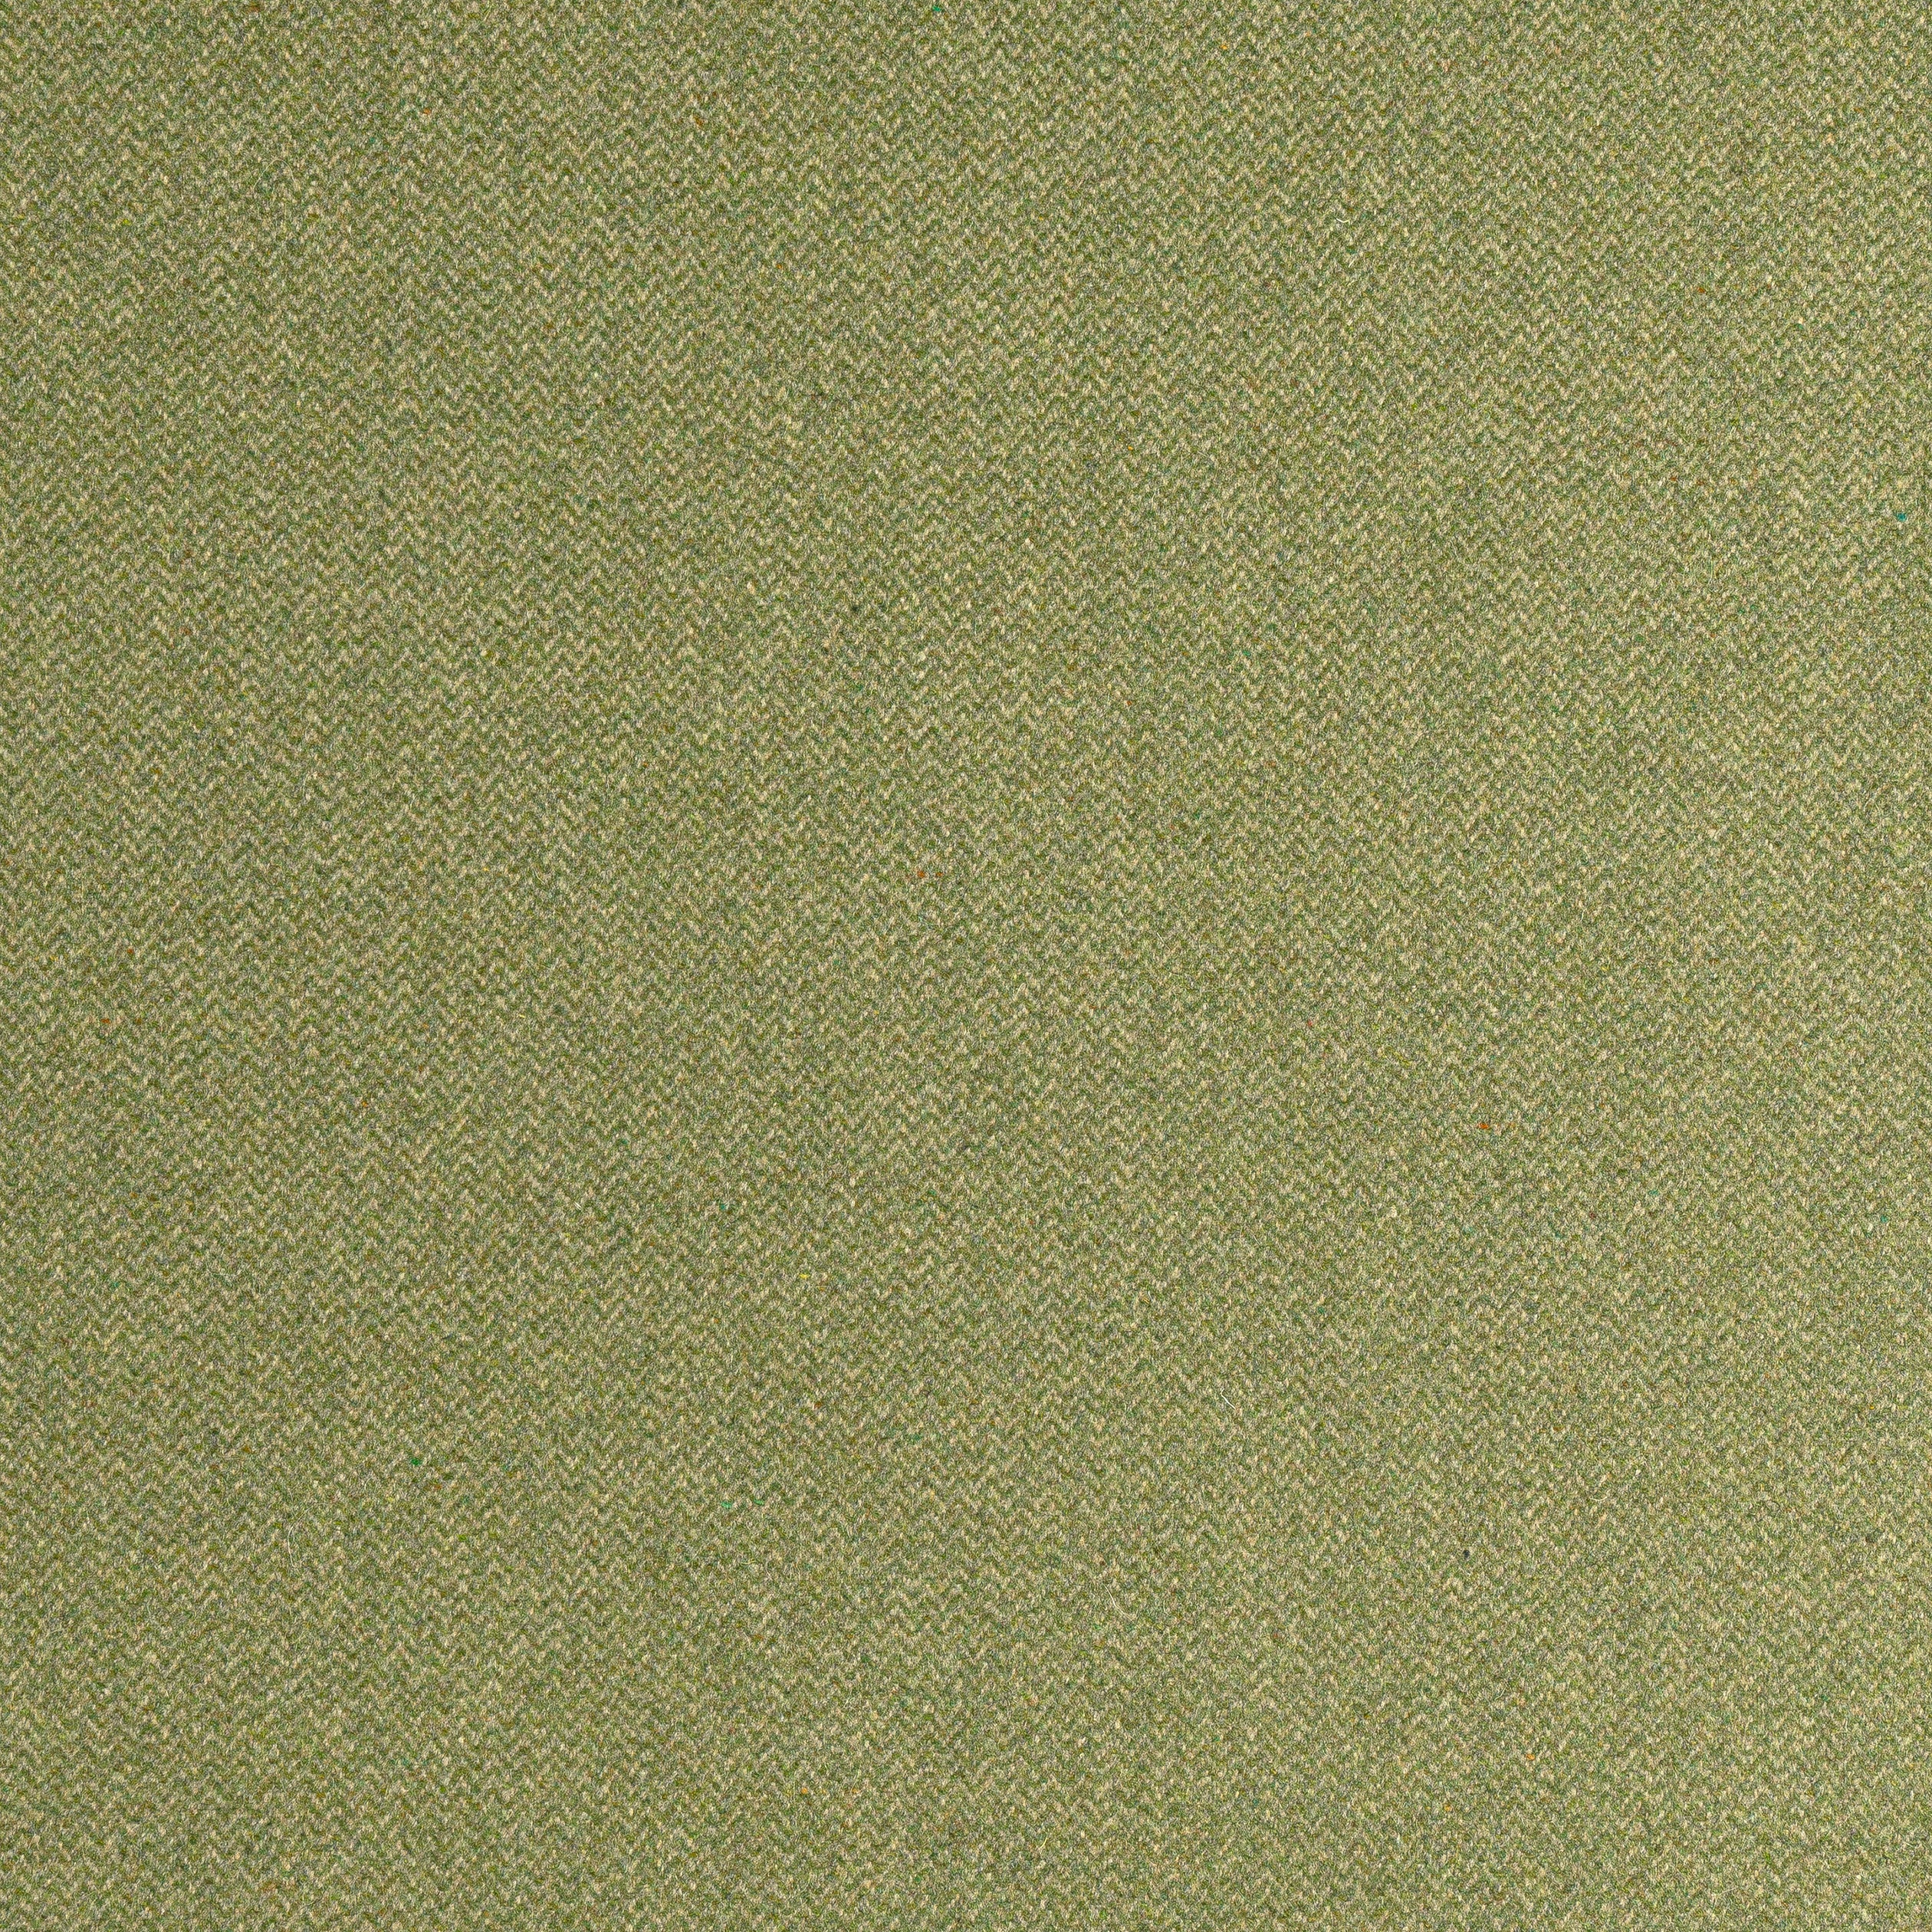 Dorset fabric in moss color - pattern number W80908 - by Thibaut in the Dunmore collection